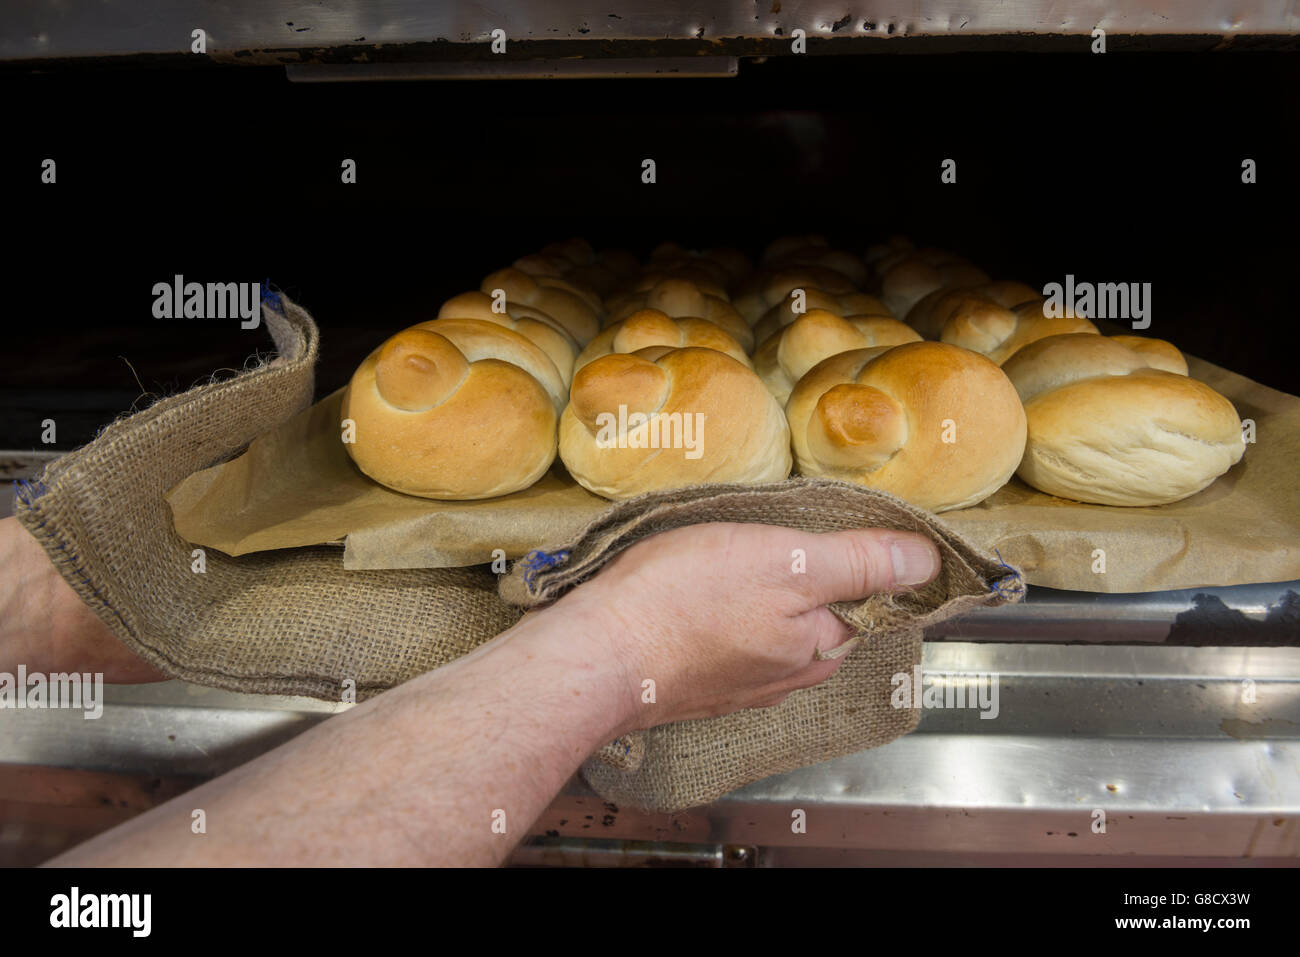 https://c8.alamy.com/comp/G8CX3W/baker-removing-freshly-baked-bread-rolls-from-the-oven-england-G8CX3W.jpg